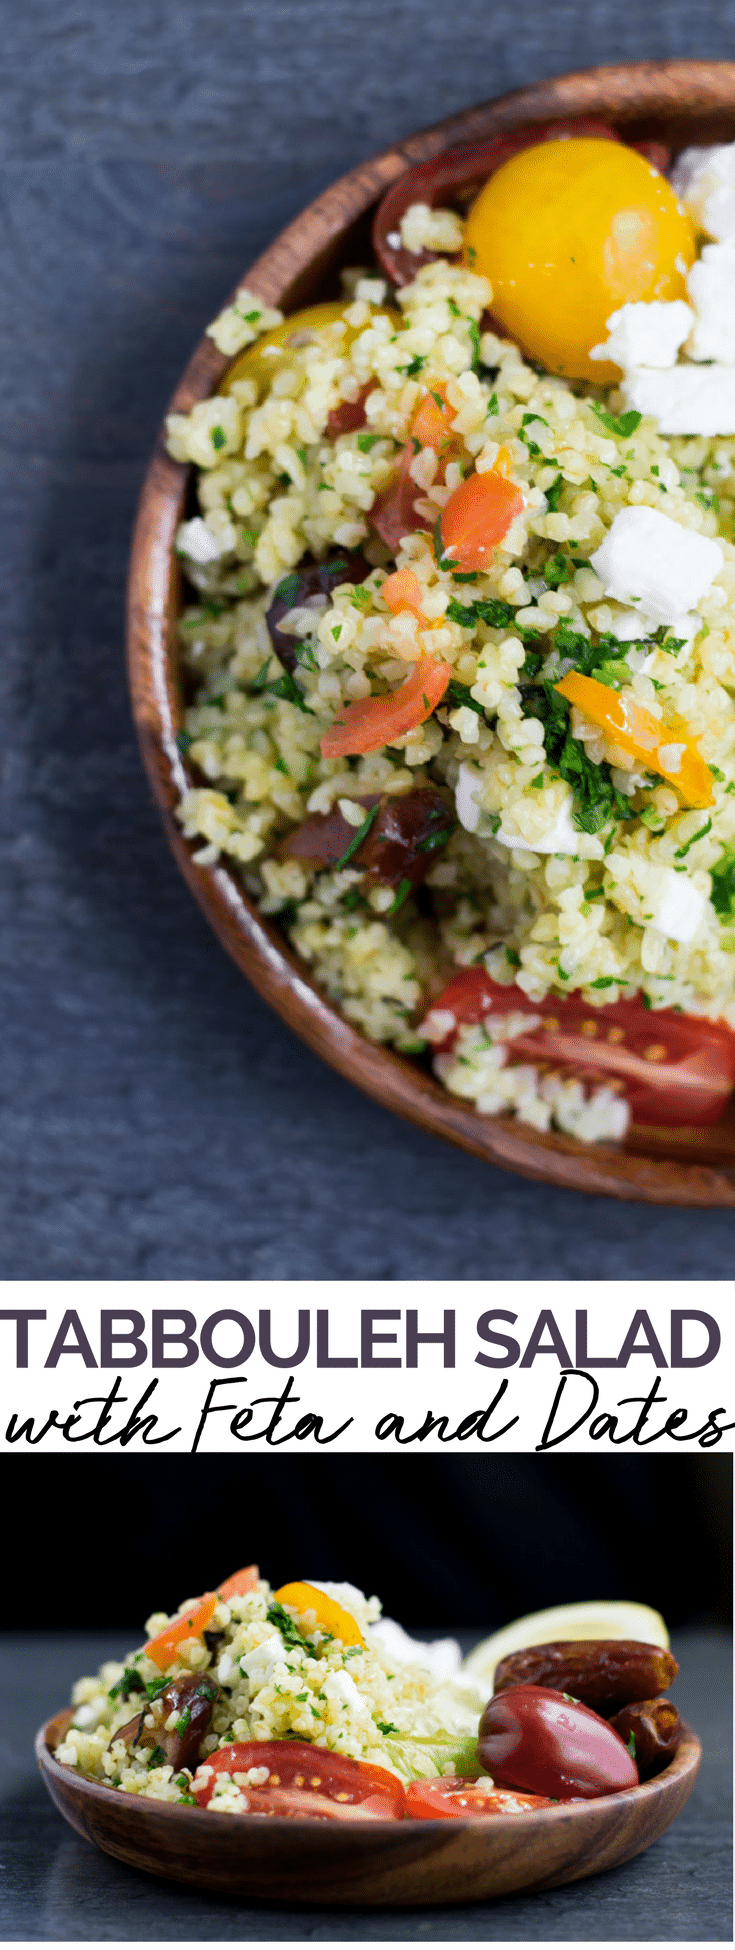 Tabbouleh Salad with Feta and Dates